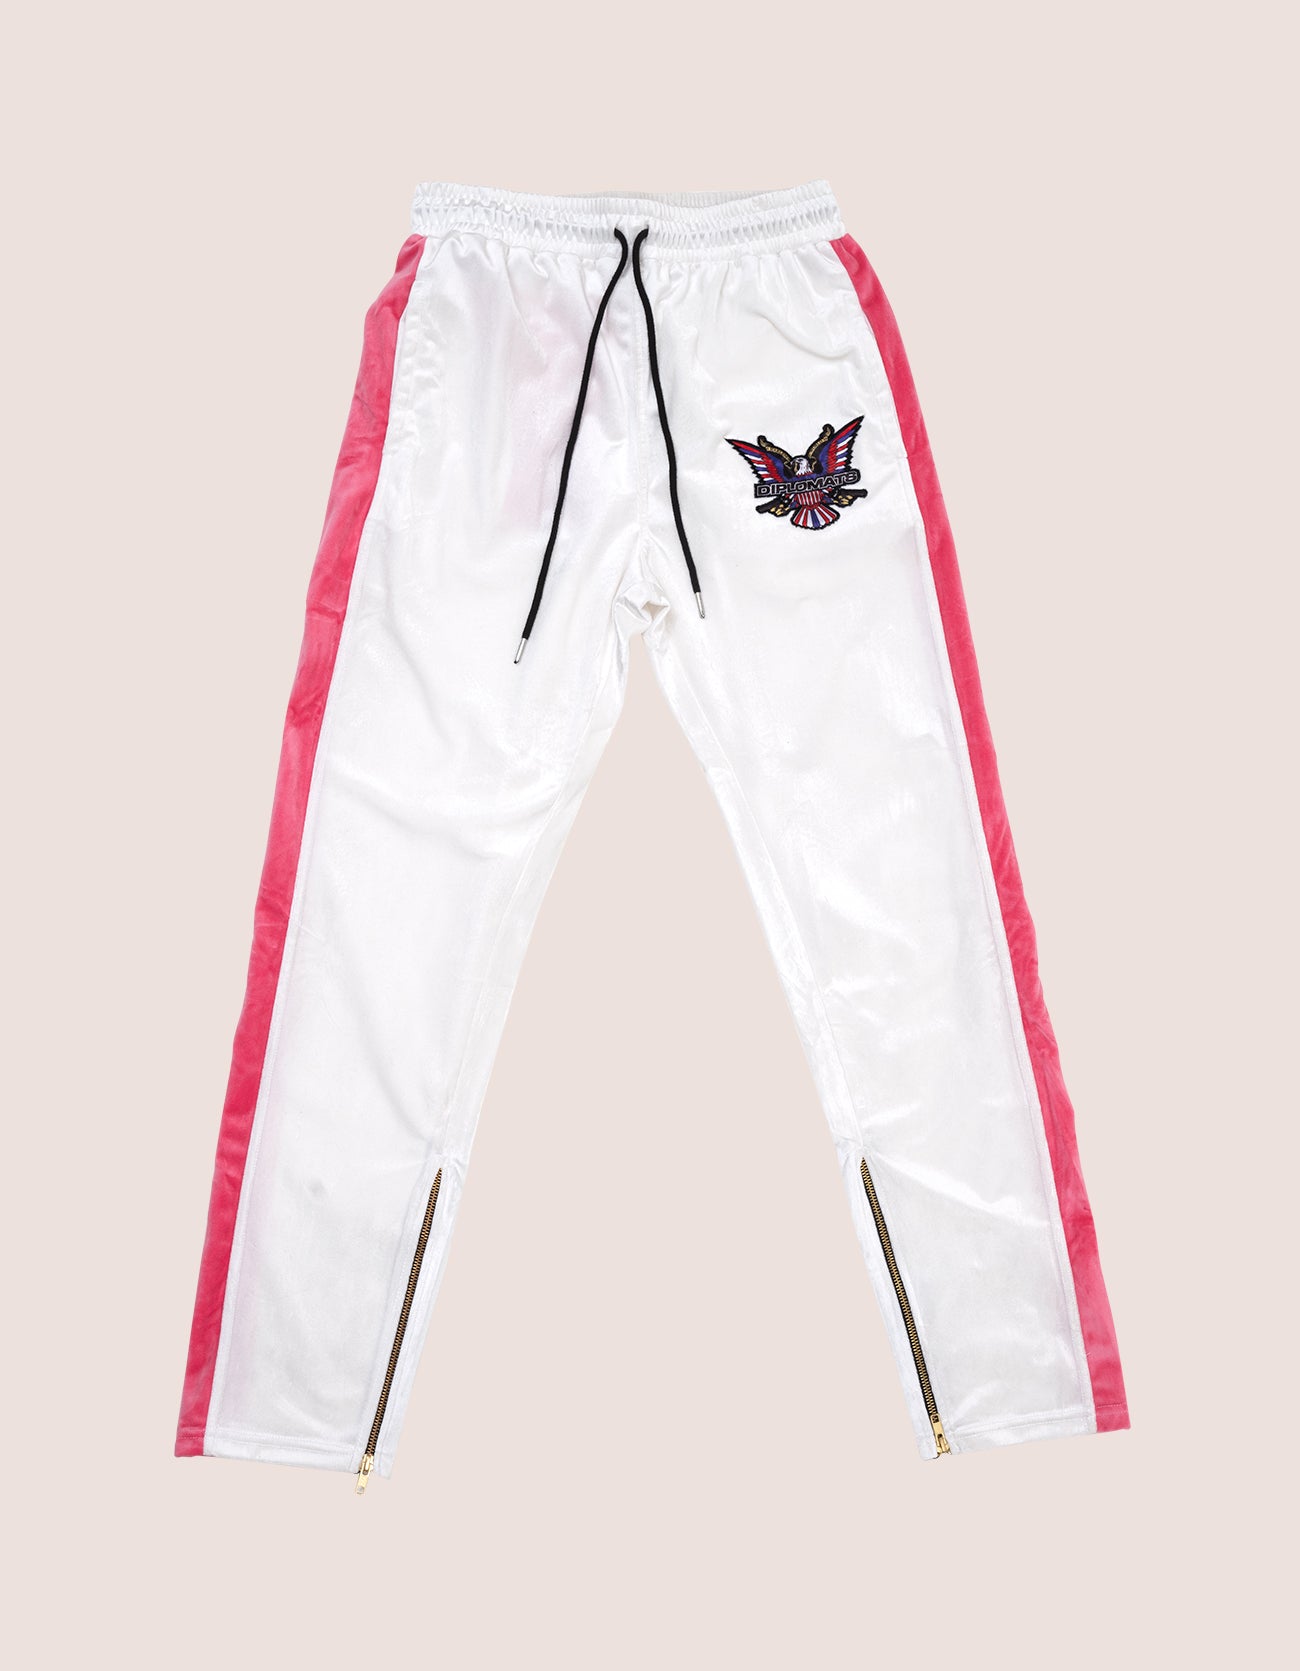 Track & Sweat Suits – DIPSET COUTURE